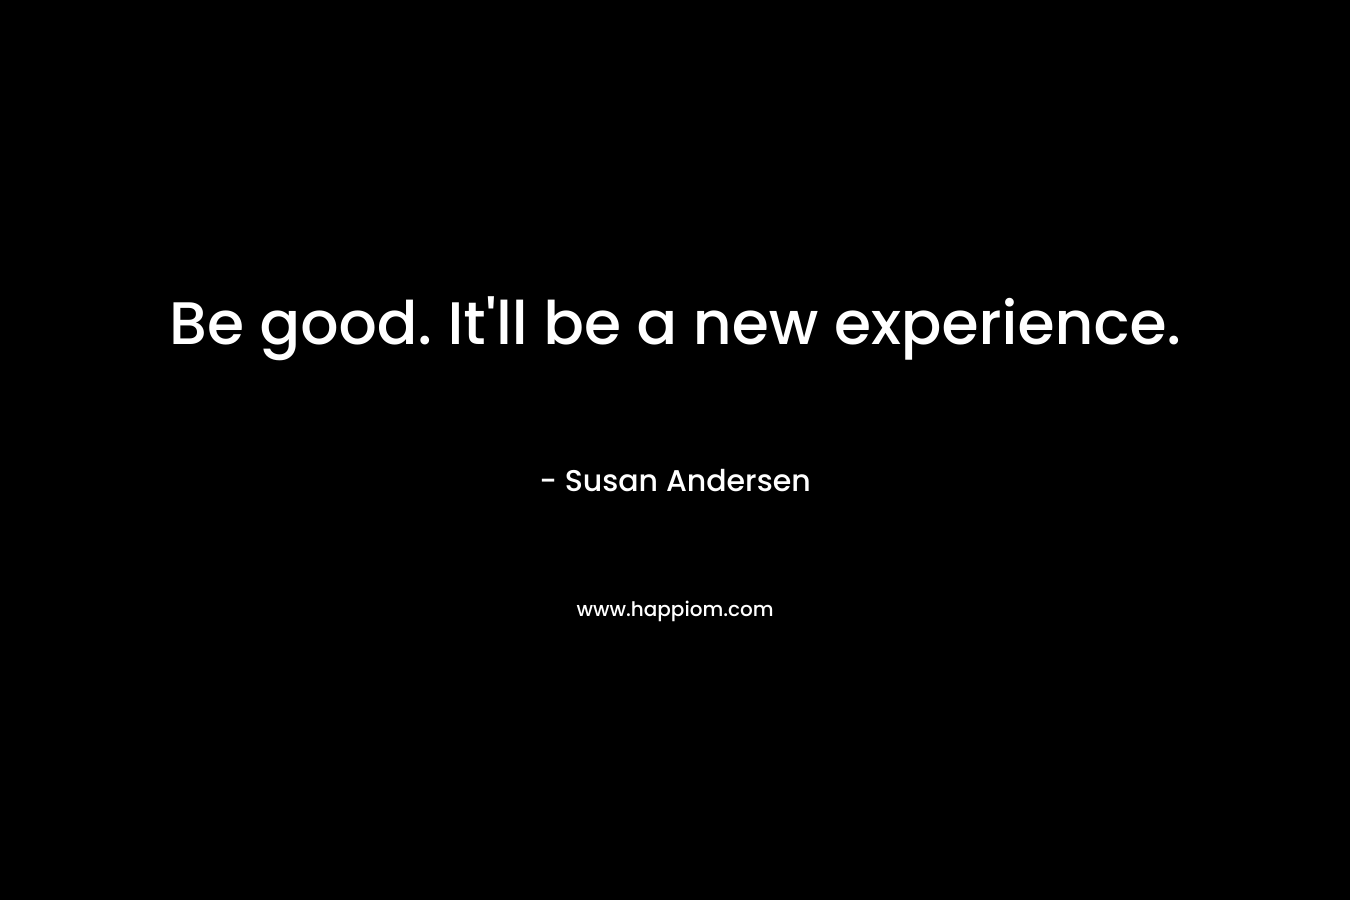 Be good. It’ll be a new experience. – Susan Andersen